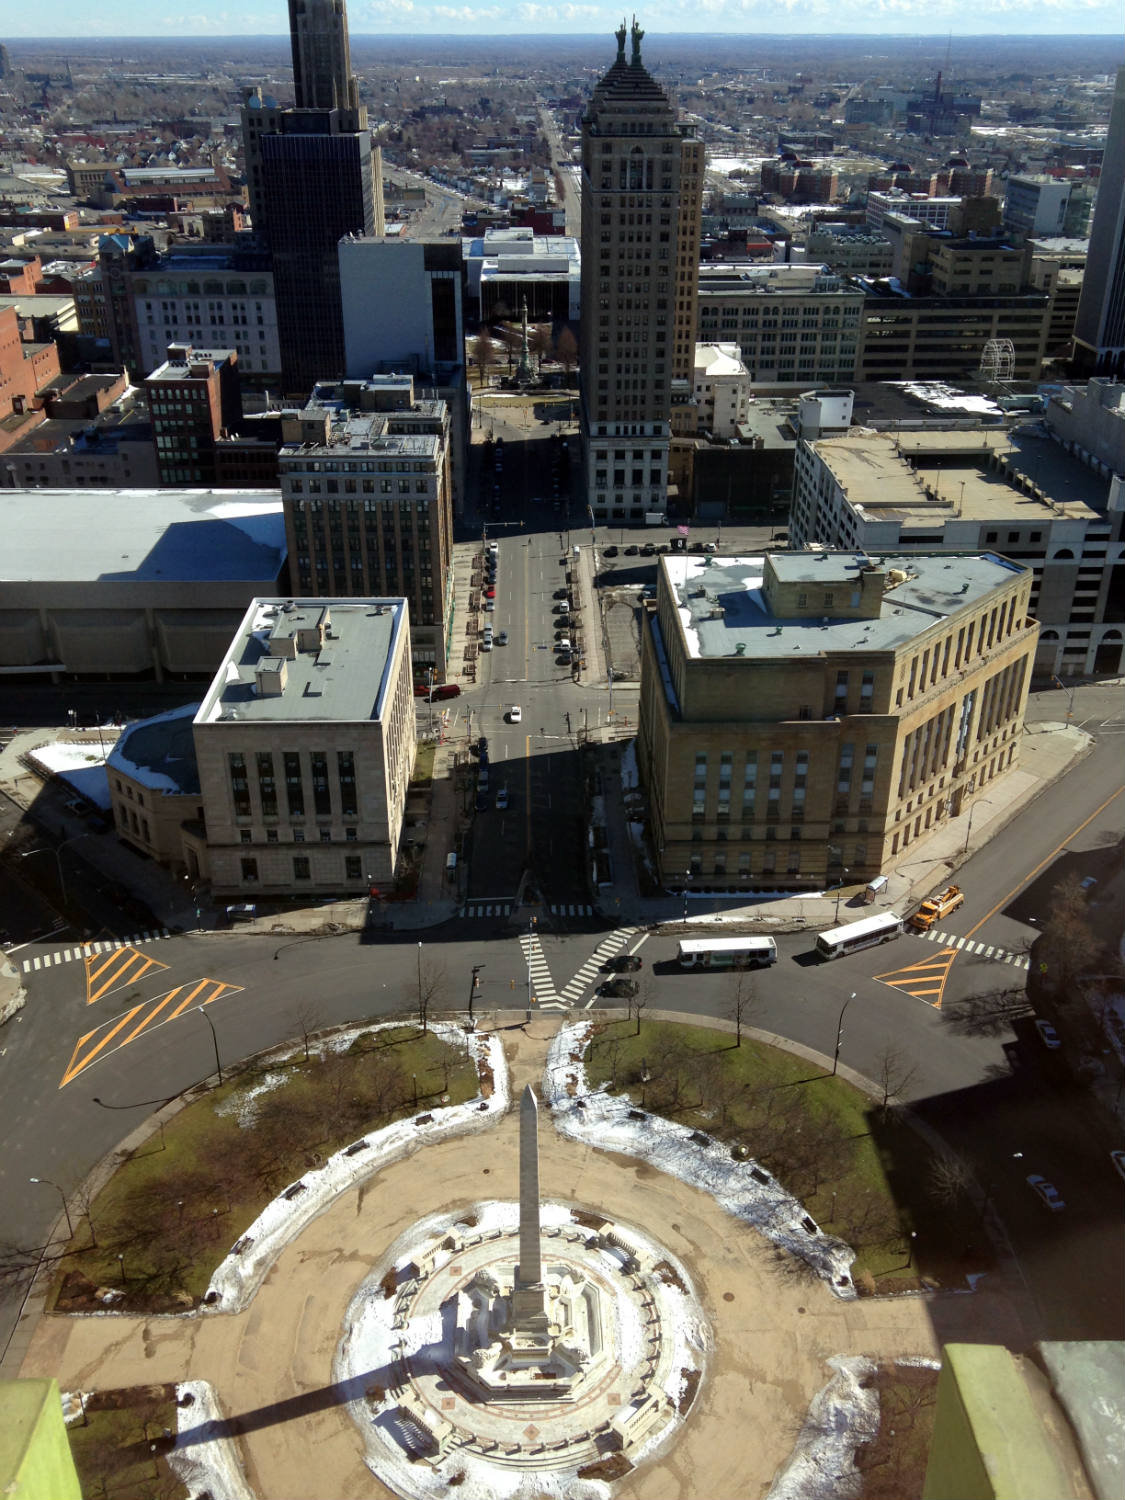 Niagara Square from the Observation Deck of Buffalo City Hall